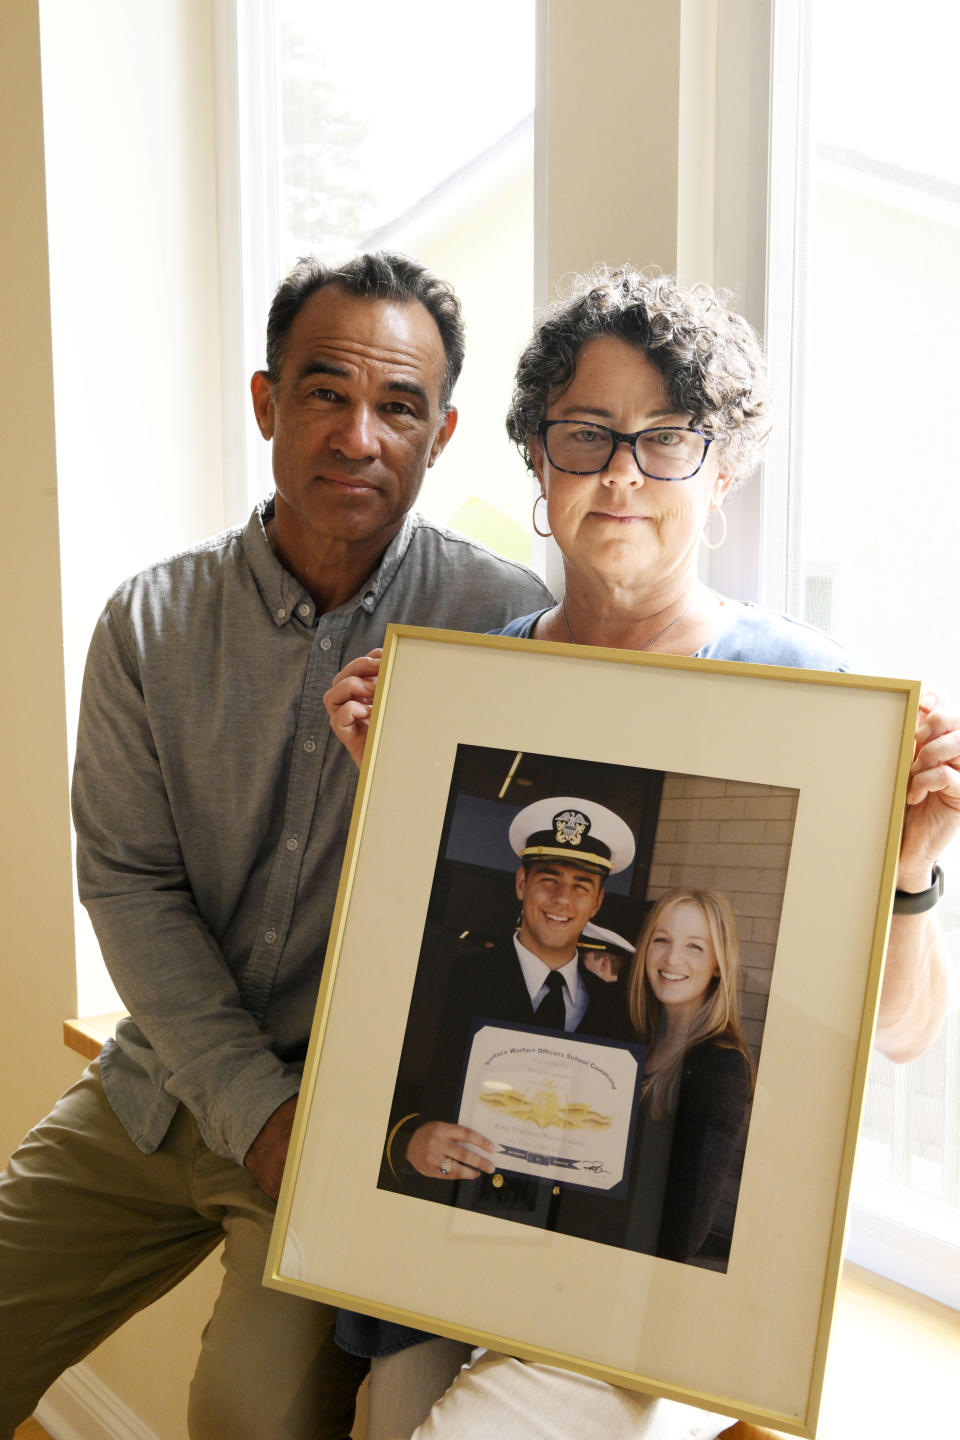 Derek and Suzi Alkonis pose with a photo of their son Lt. Ridge Alkonis and Brittany Alkonis on Wednesday, June 1, 2022, in Dana Point, Calif. Their son, a U.S. Navy lieutenant in Japan, faces a potential three-year prison sentence for a car crash that killed two people last year. The sentence has been appealed, and a hearing is set for Wednesday, June 8. (AP Photo/Denis Poroy)